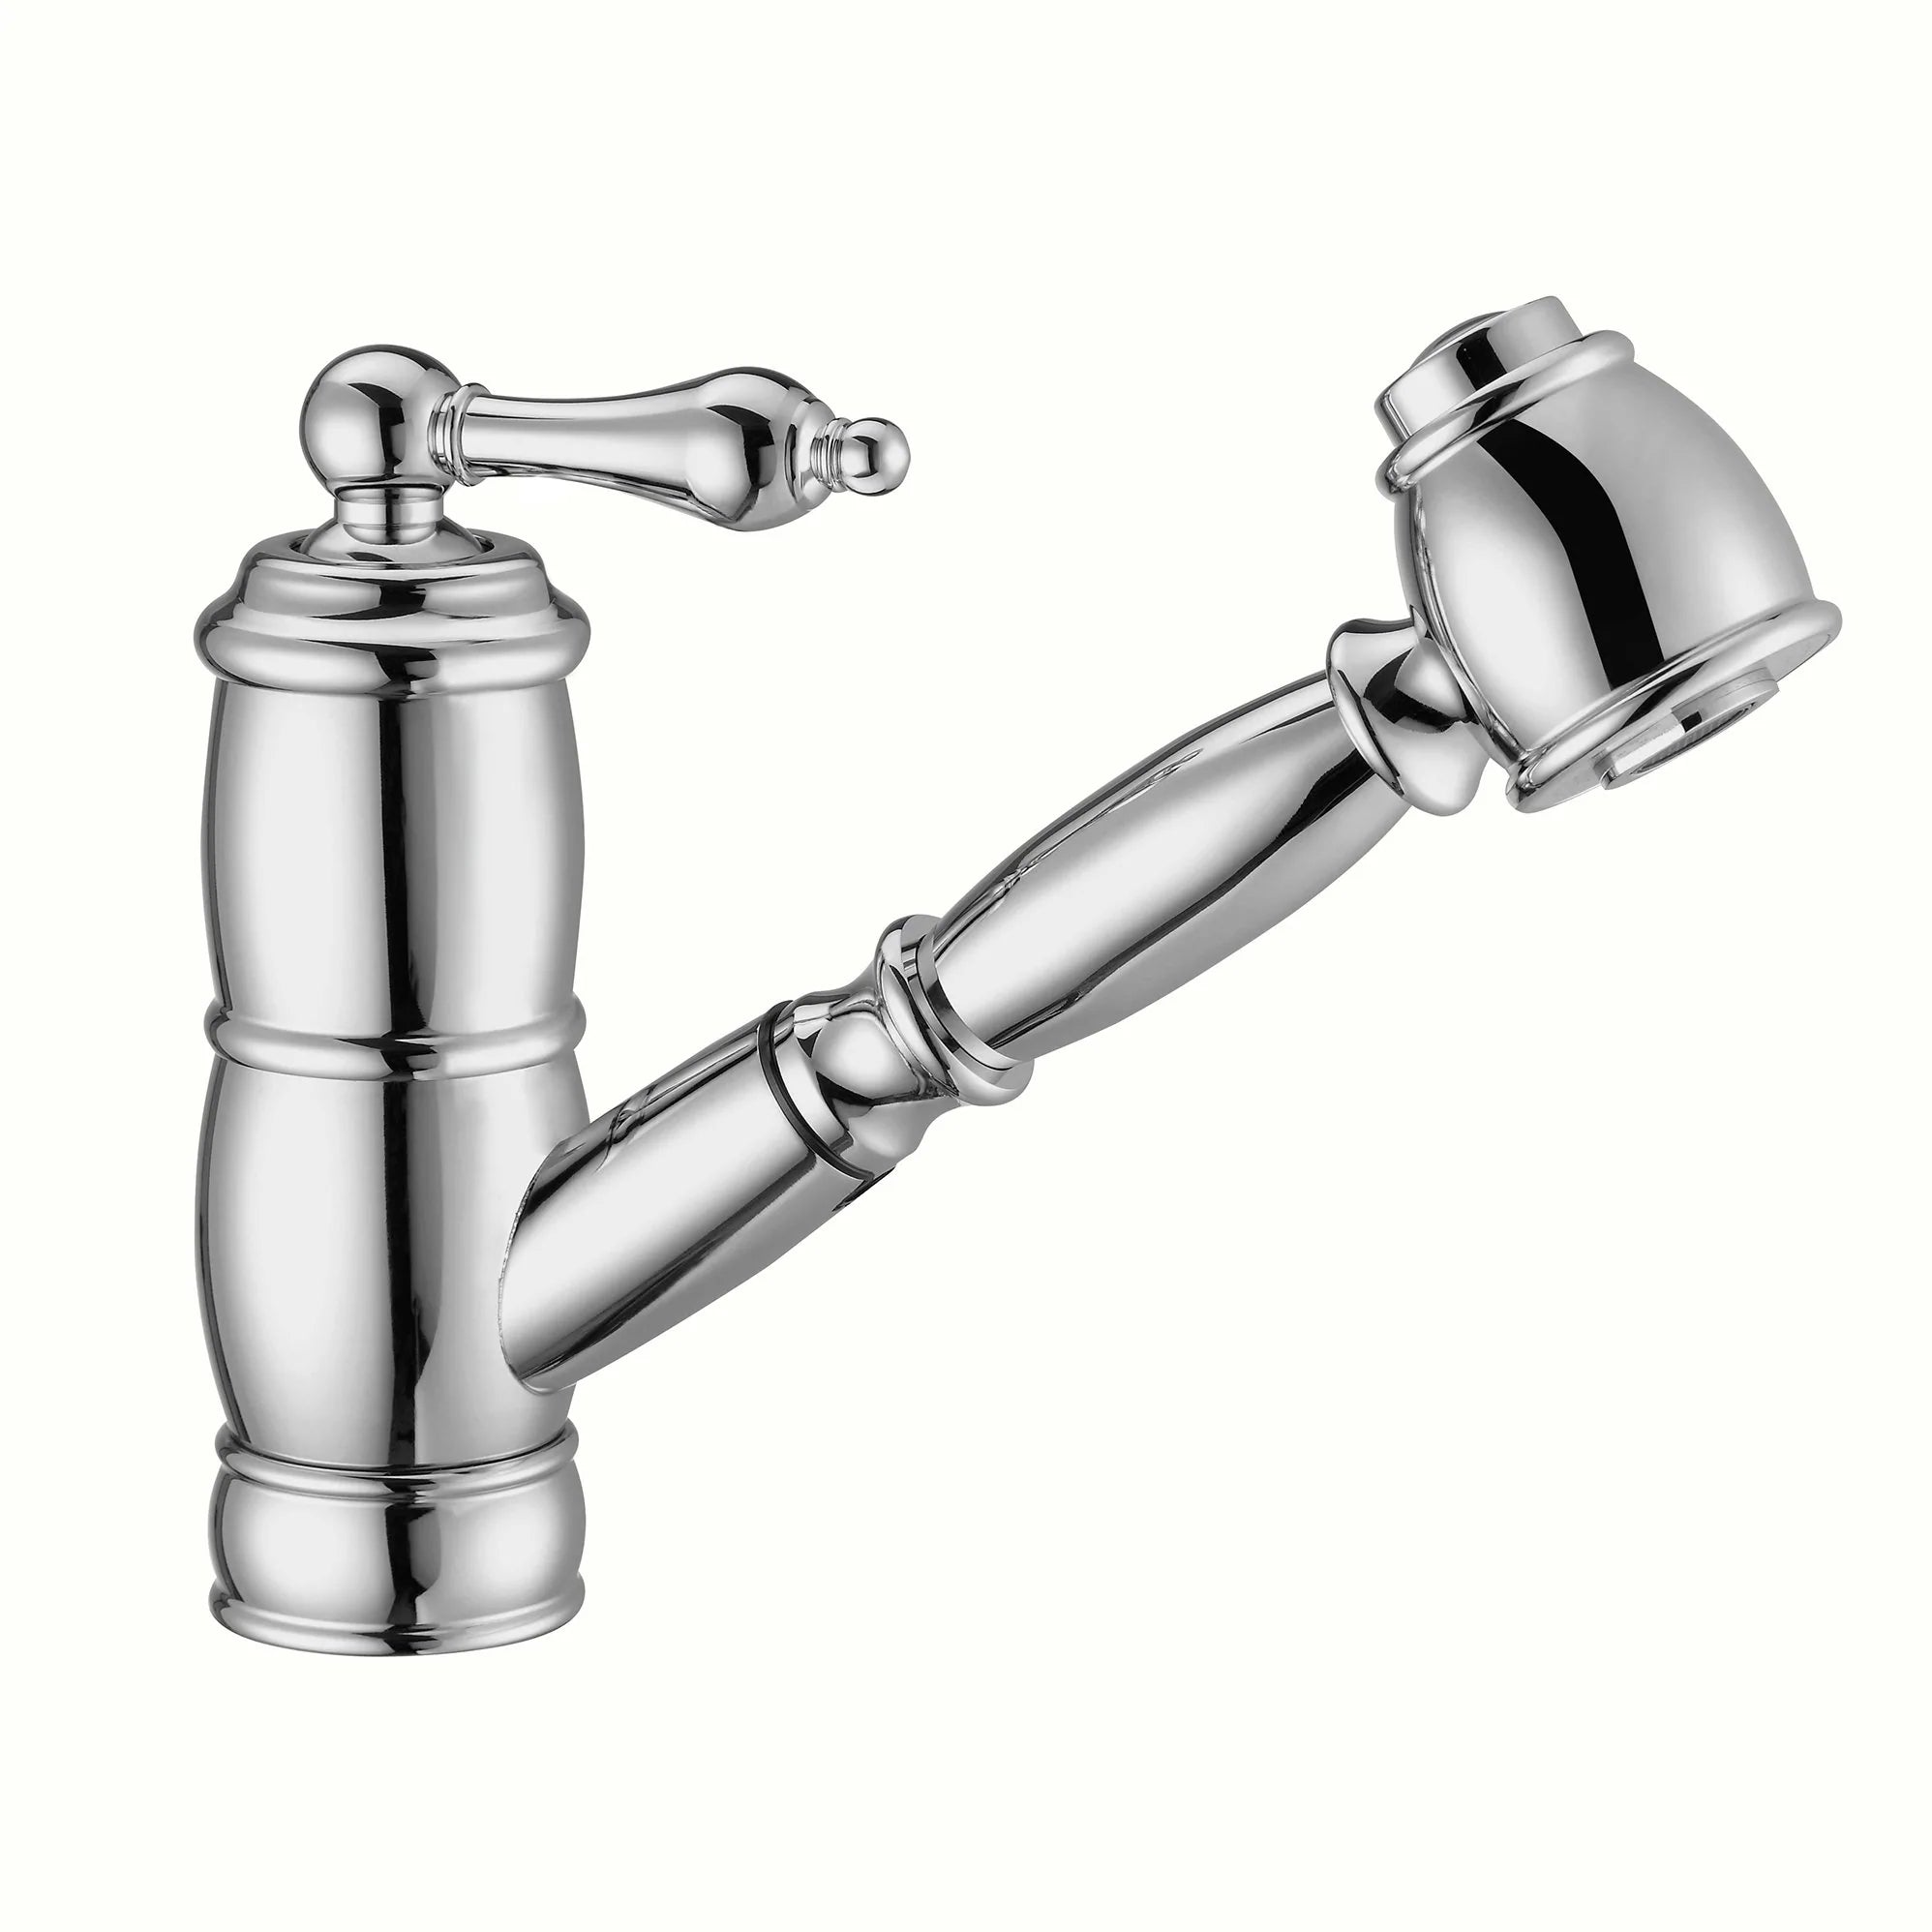 WHITEHAUS Vintage III plus Single Hole, Single Lever Faucet with a Pull-Out Spray Head - WHKPSL3-2222-NT